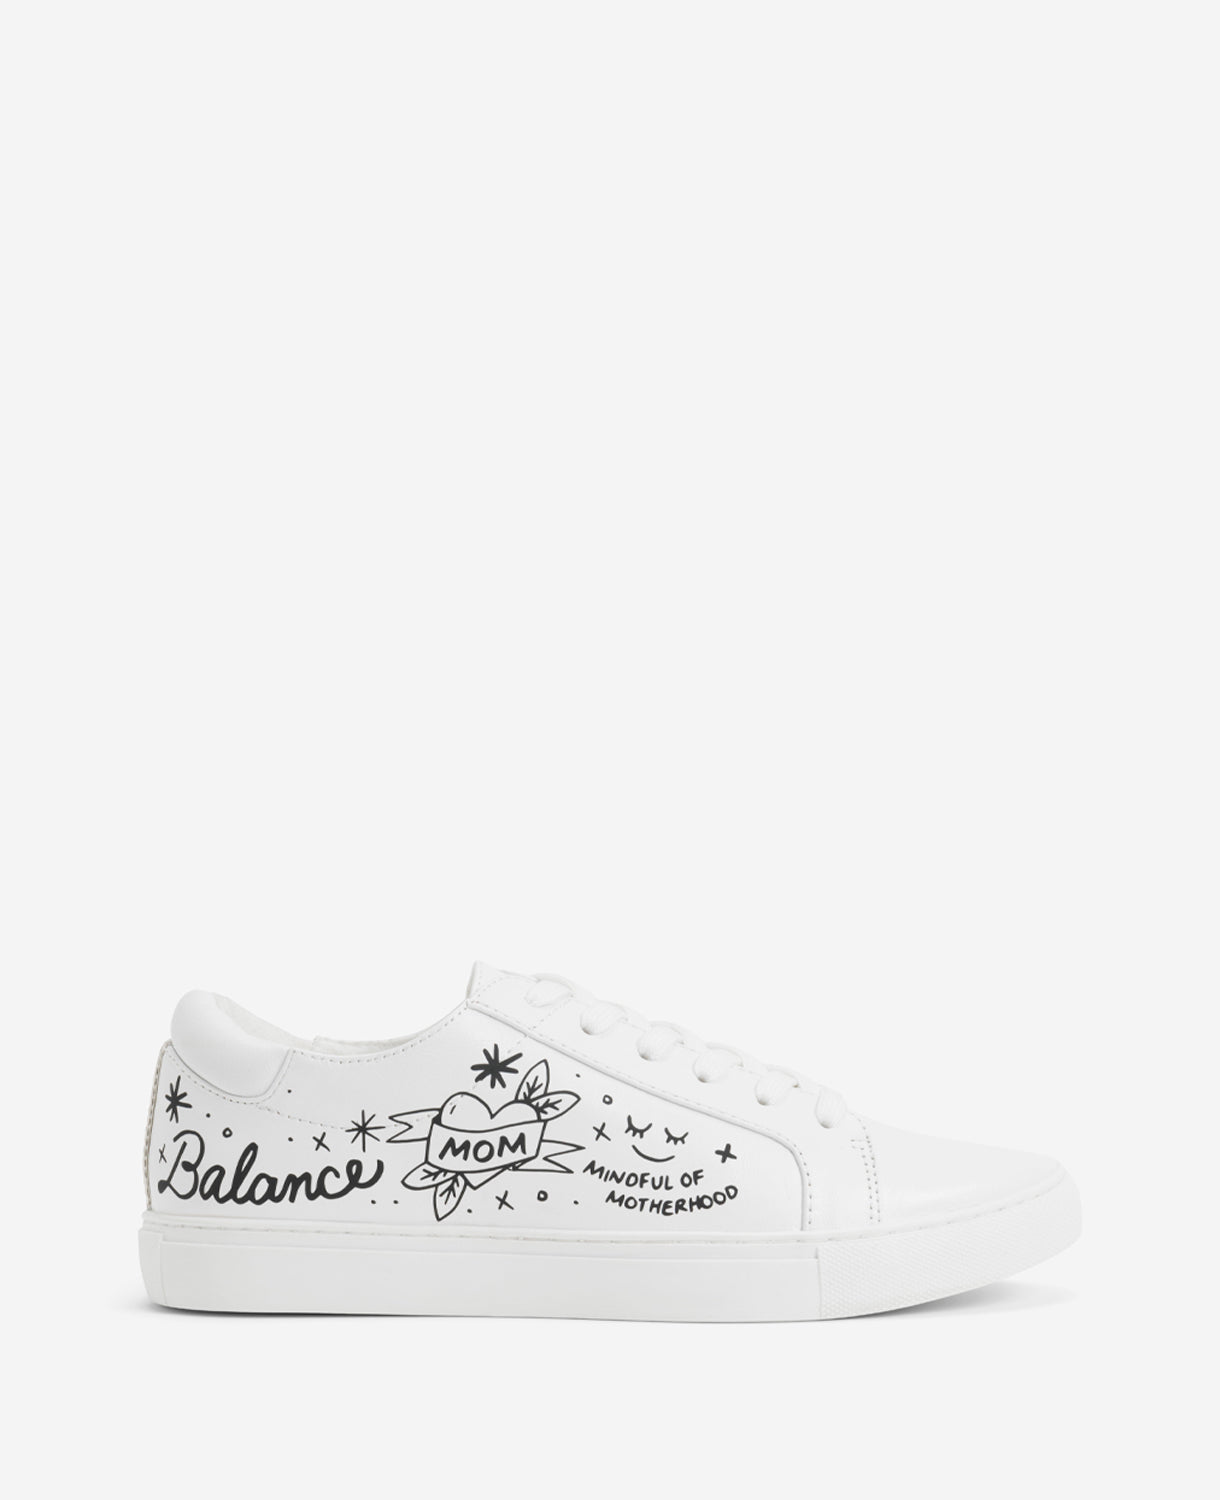 Kenneth Cole Site Exclusive! Sophia Chang - Mom Sneaker In White